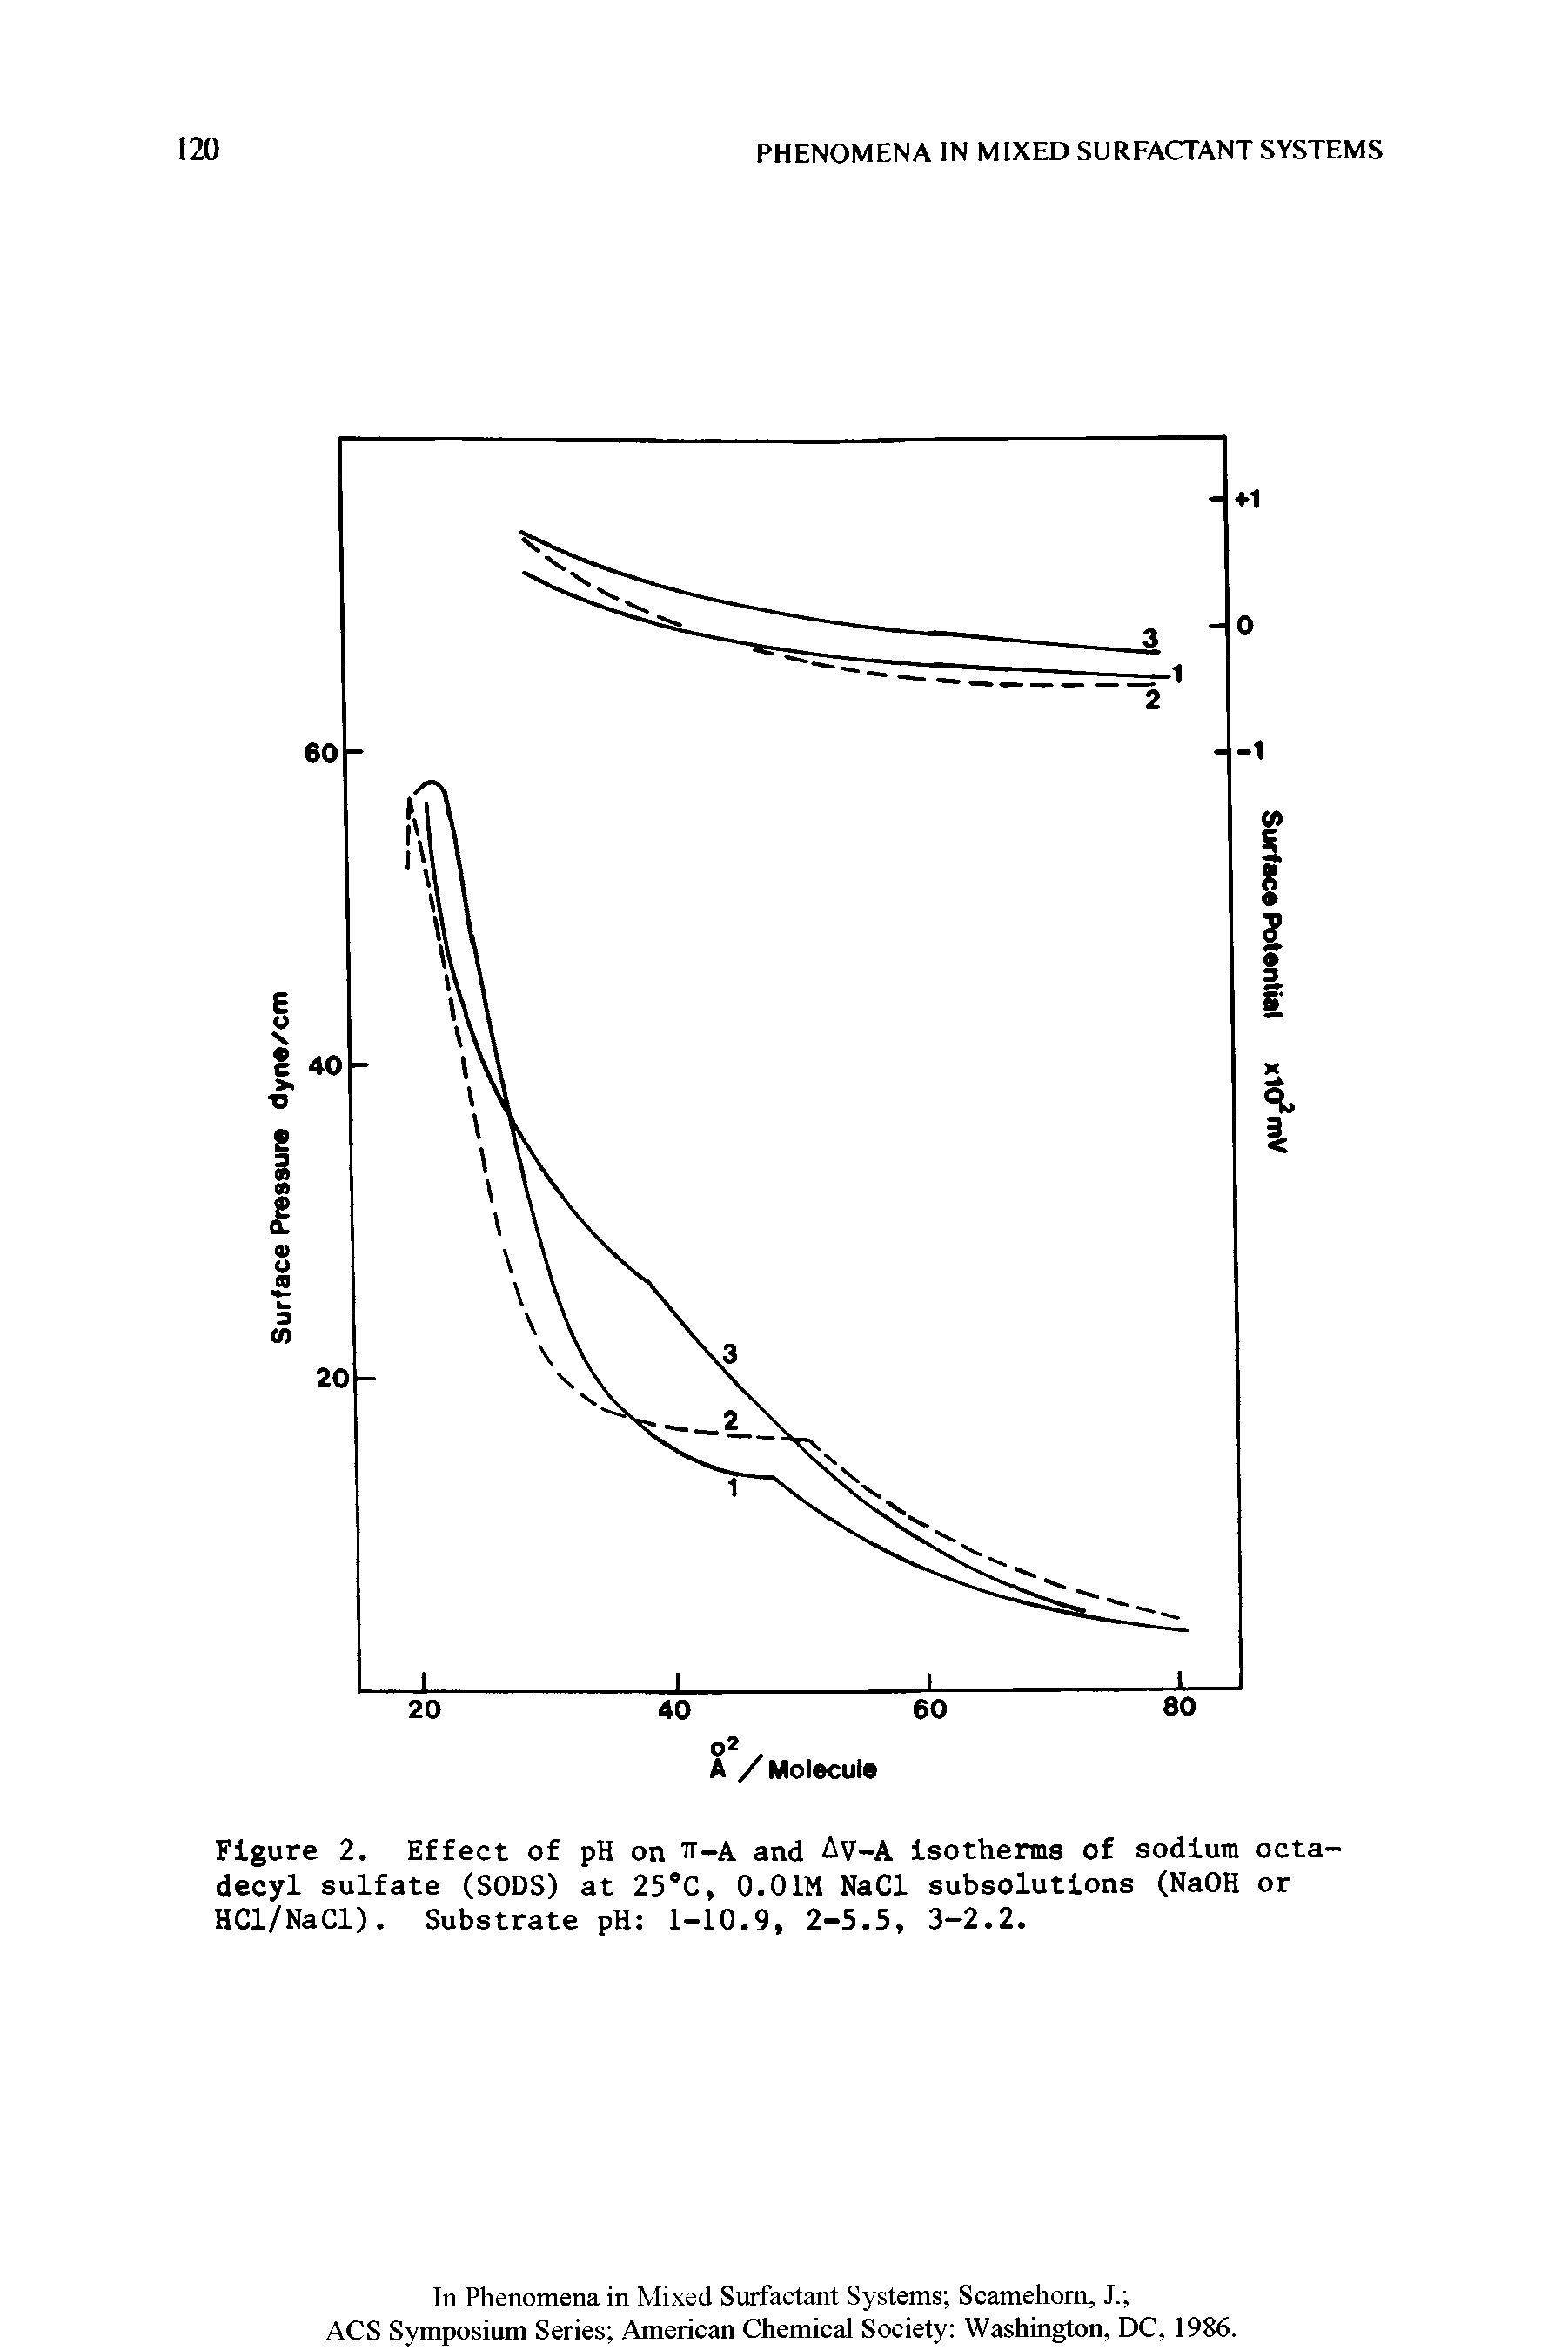 Figure 2. Effect of pH on ii-A and Av-A isotherms of sodium octa-decyl sulfate (SODS) at 25 C, O.OIM NaCl subsolutions (NaOH or HCl/NaCl). Substrate pH 1-10.9, 2-5.5, 3-2.2.